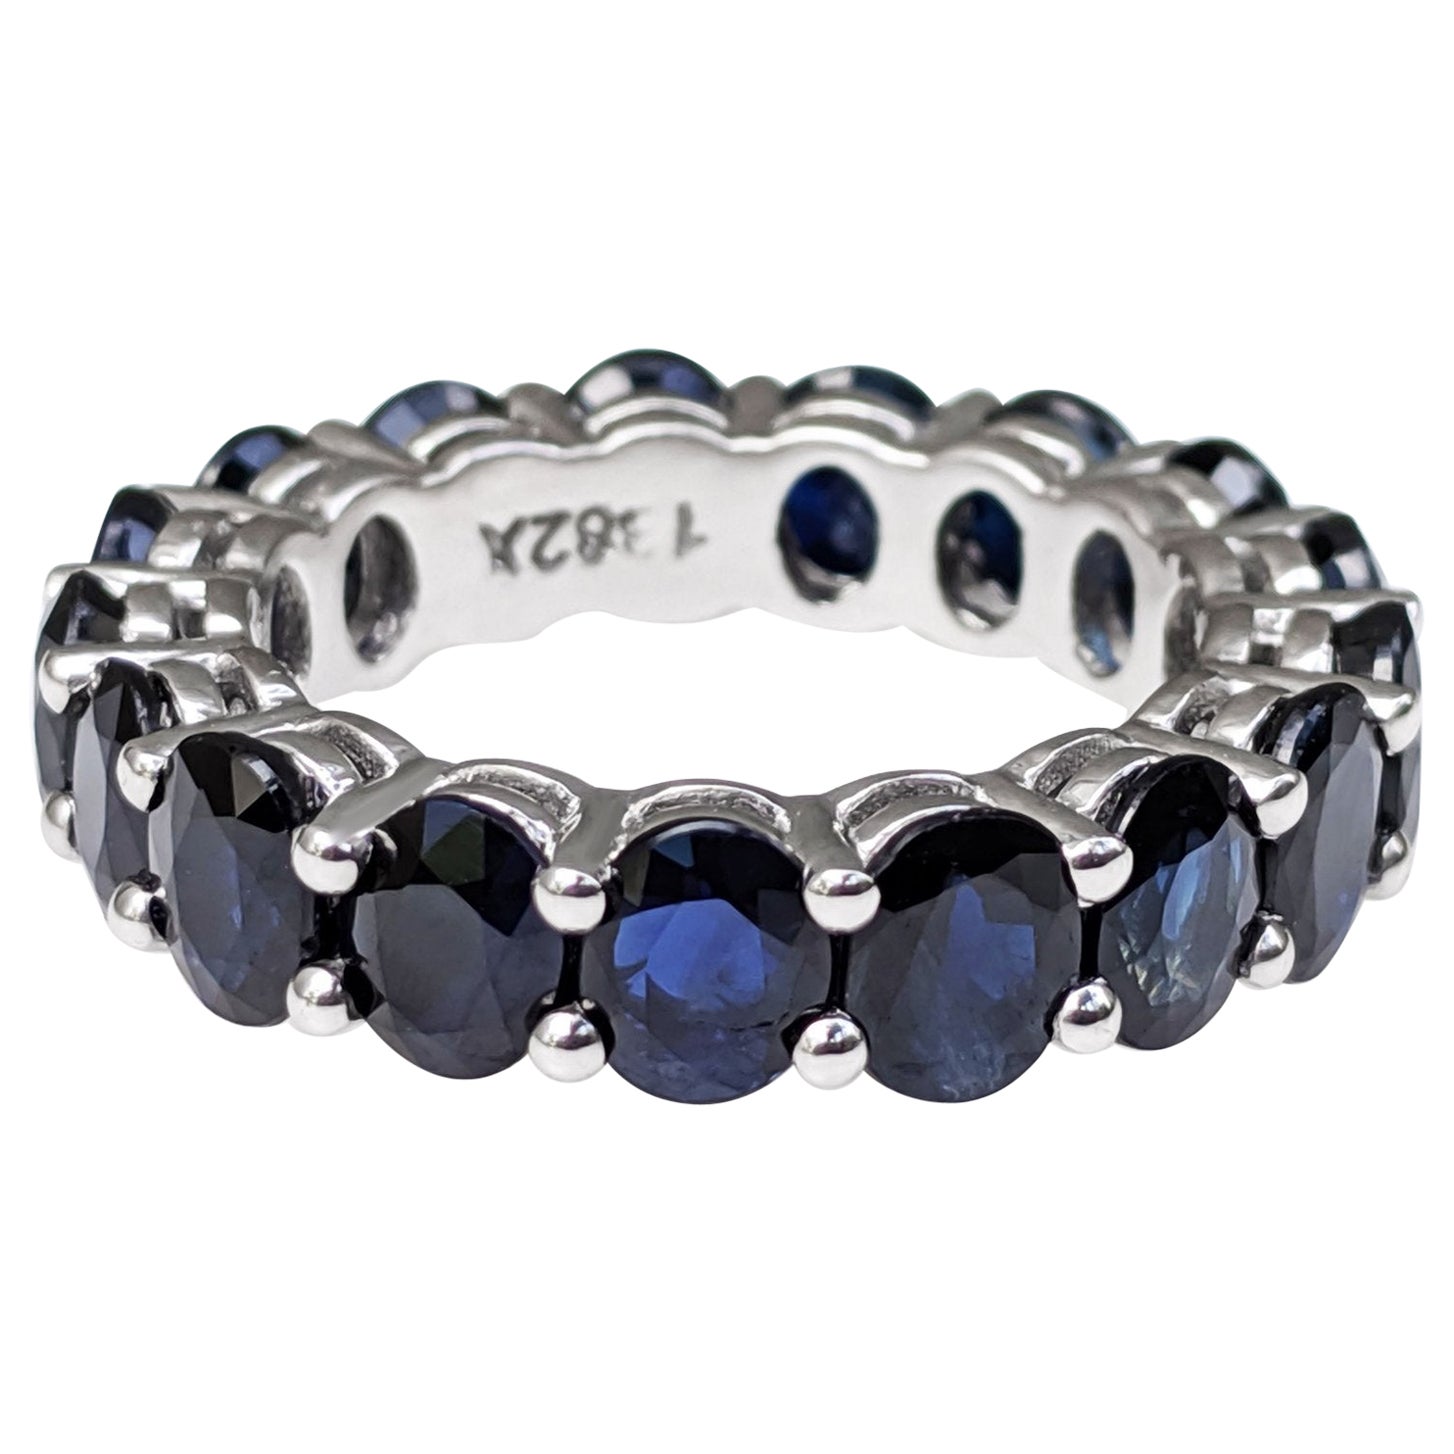 $1 NO RESERVE! 7.88 Carat Sapphire Eternity Band - 14 kt. White gold - Ring